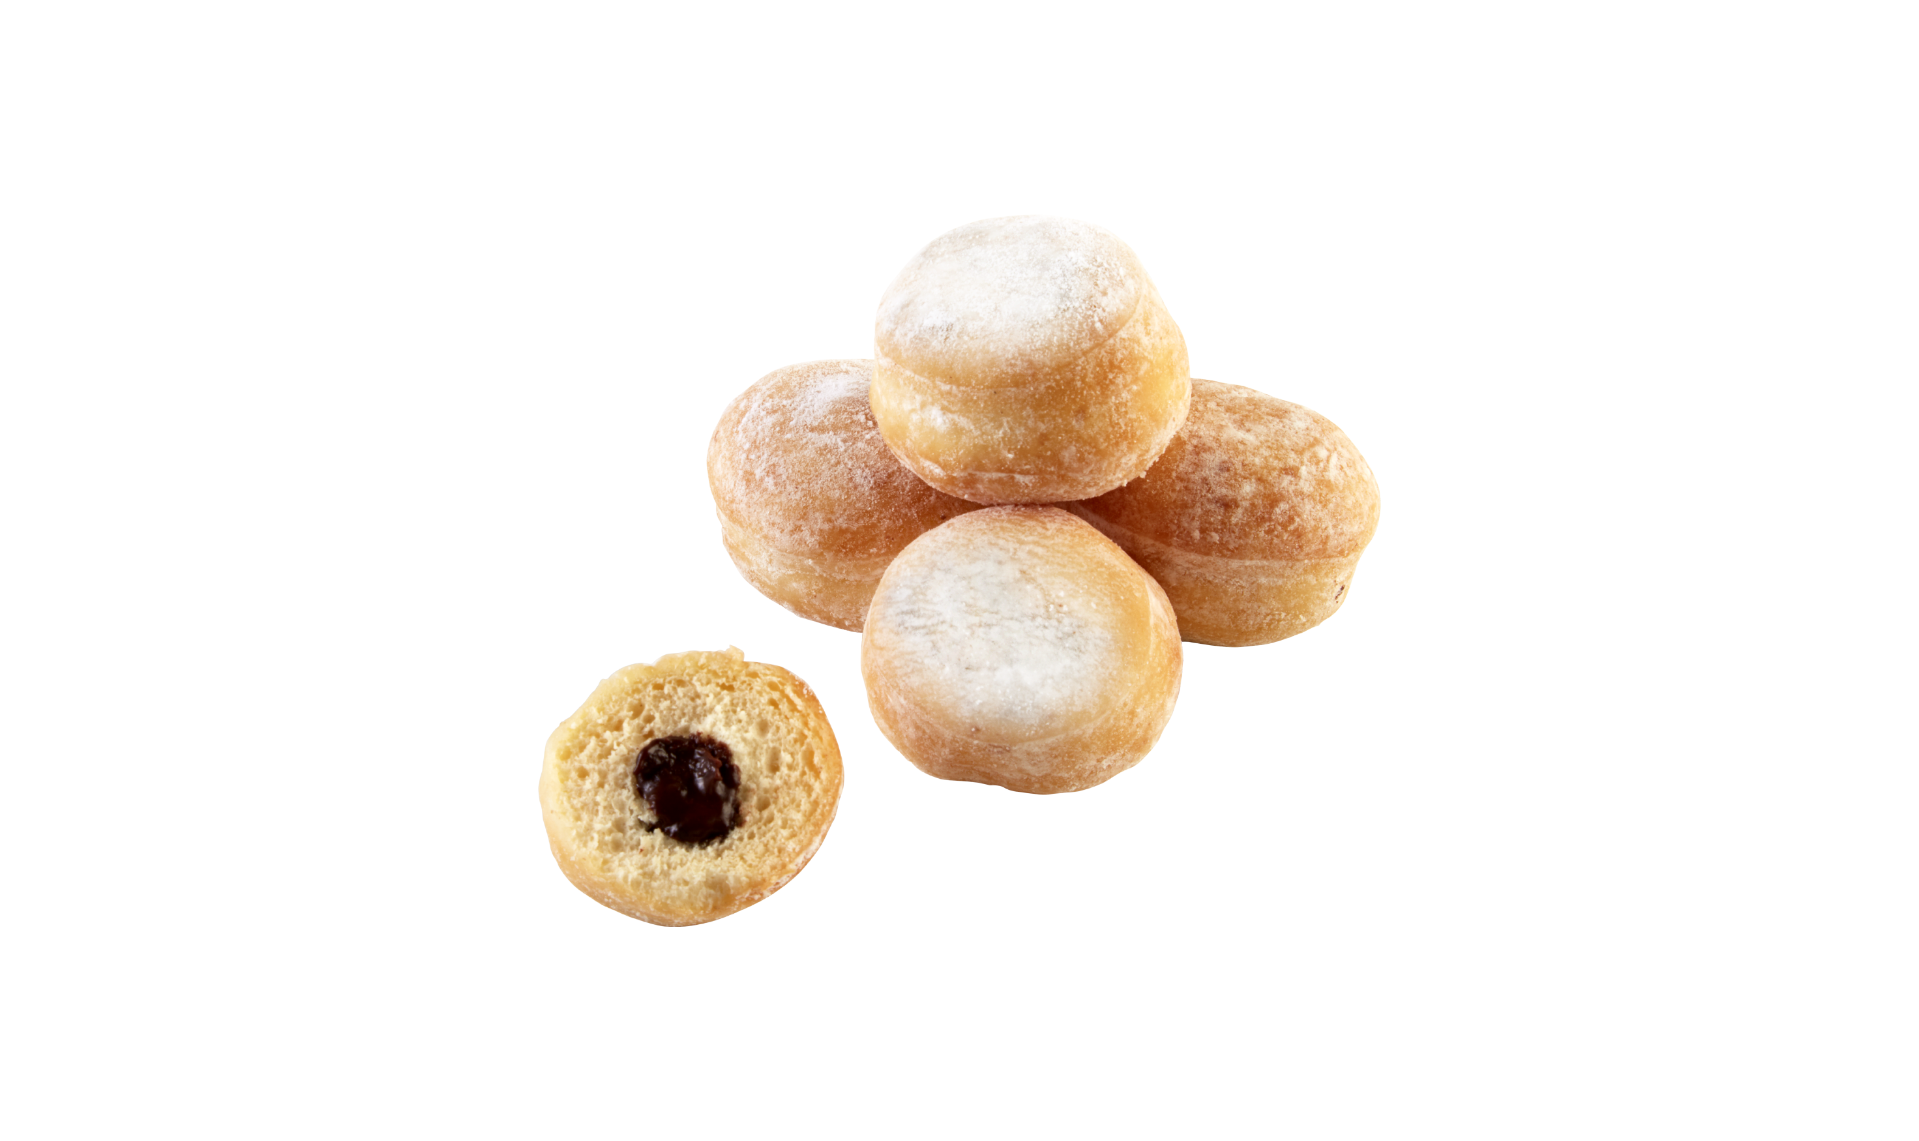 Europastry's Powdered Cocoa Filled PopDots Original.